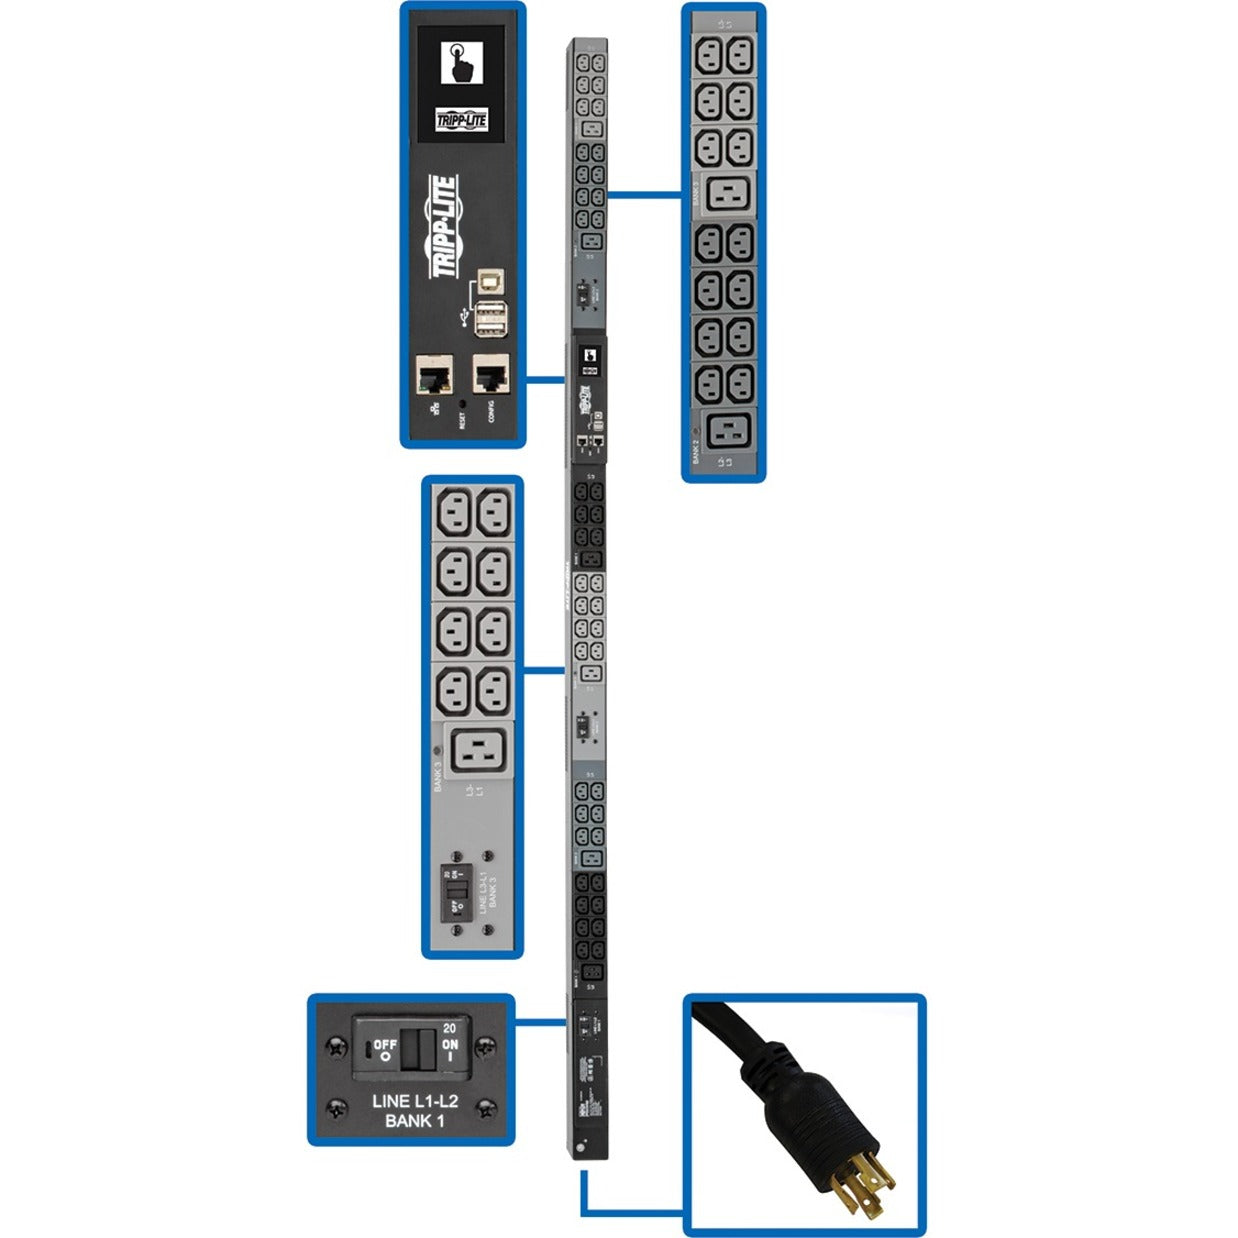 Tripp Lite PDU3EVN10l1530B 48-Outlet PDU, 10 kW Power Rating, Monitored, Three Phase